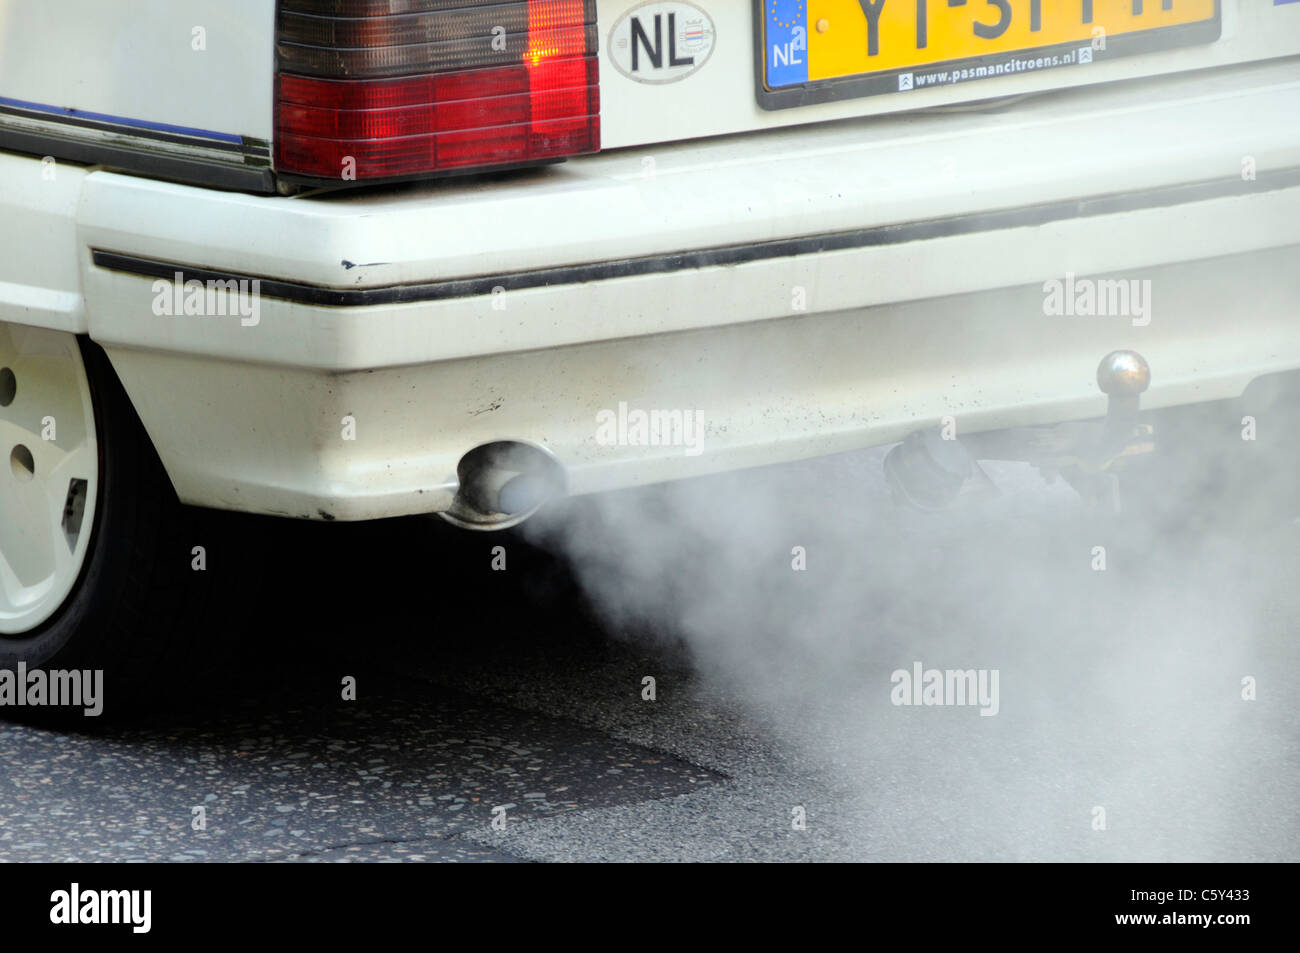 Close up Dutch registered old Citroen car with defective polluting exhaust system fumes damaging environment driving on road Park Lane London UK Stock Photo